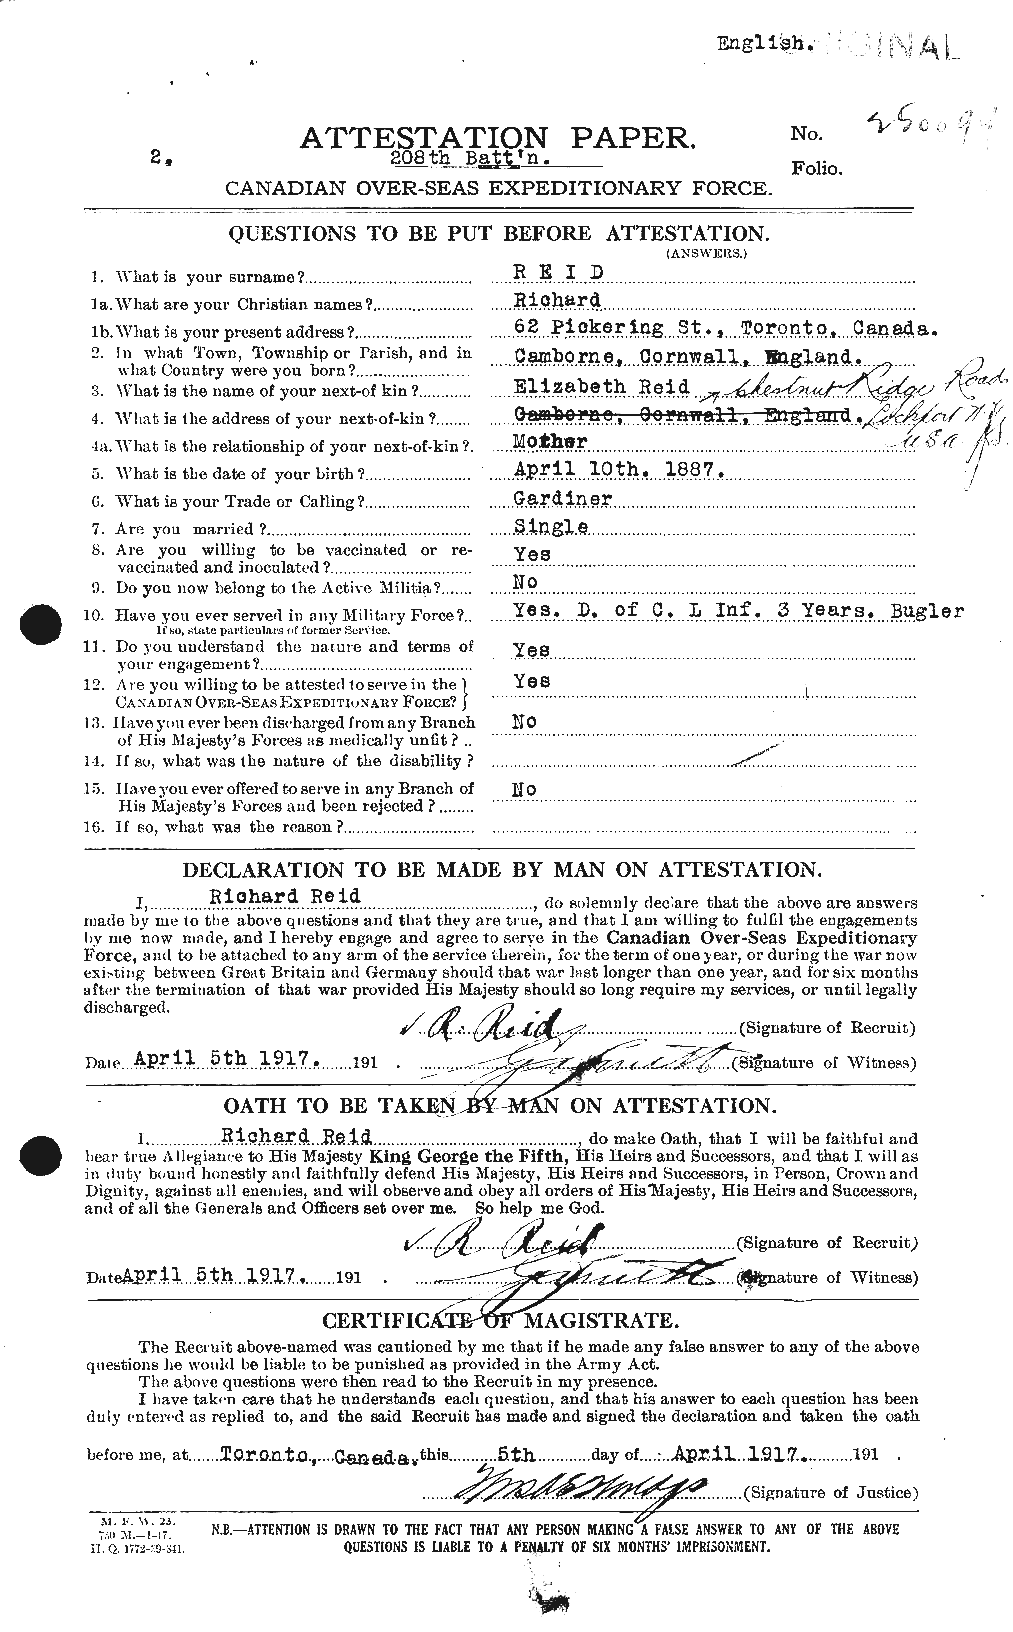 Personnel Records of the First World War - CEF 601857a